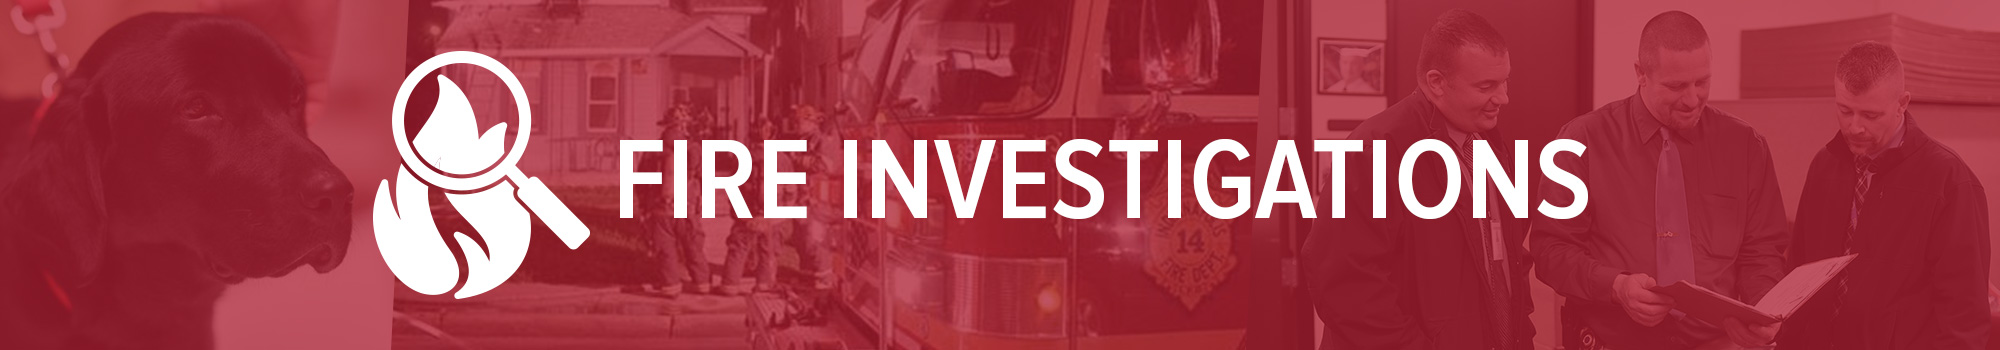 Fire Investigations Banner Graphic